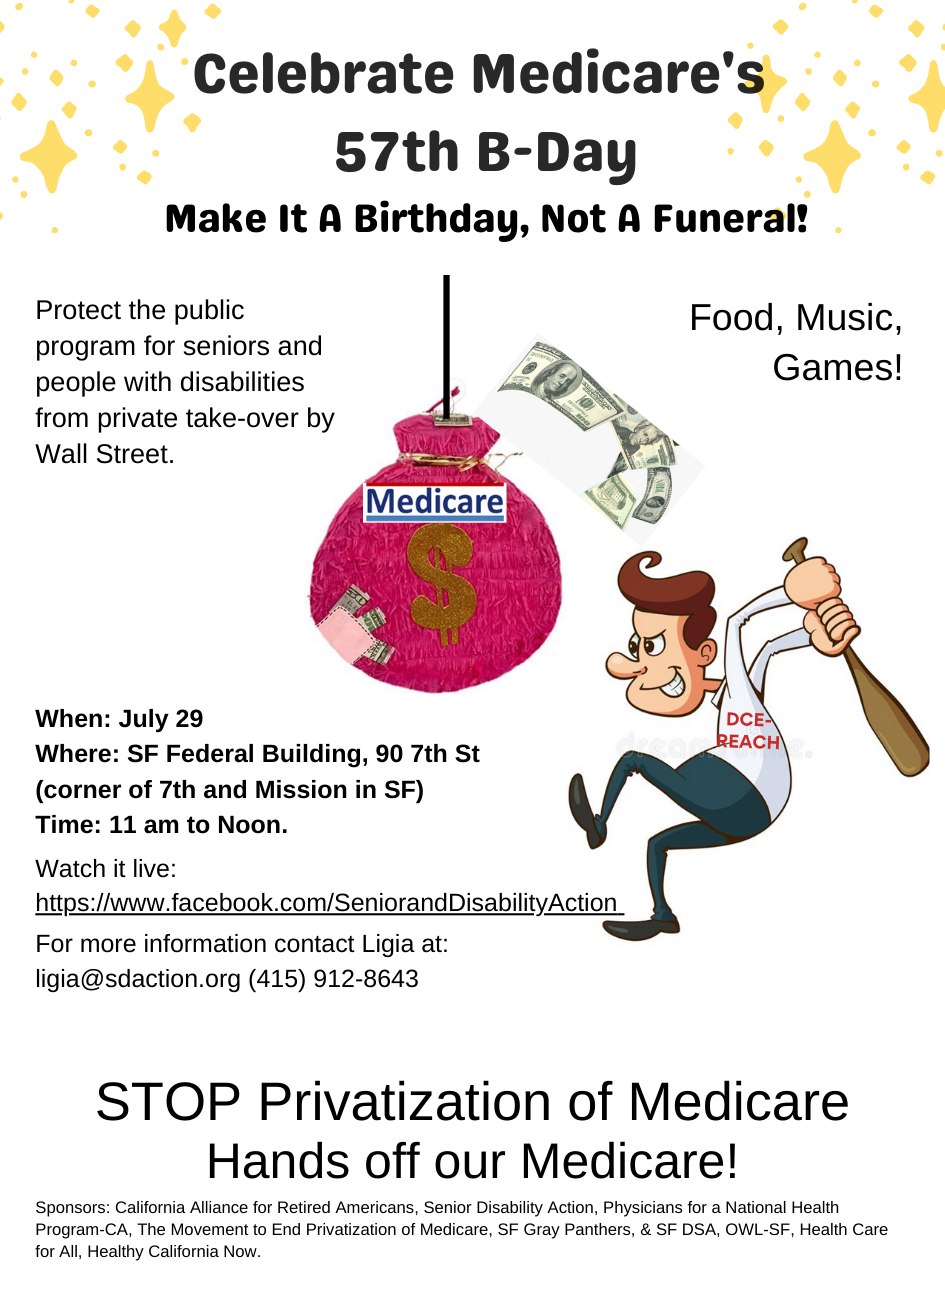 Celebrate Medicare's 57th B-Day @ Federal Building